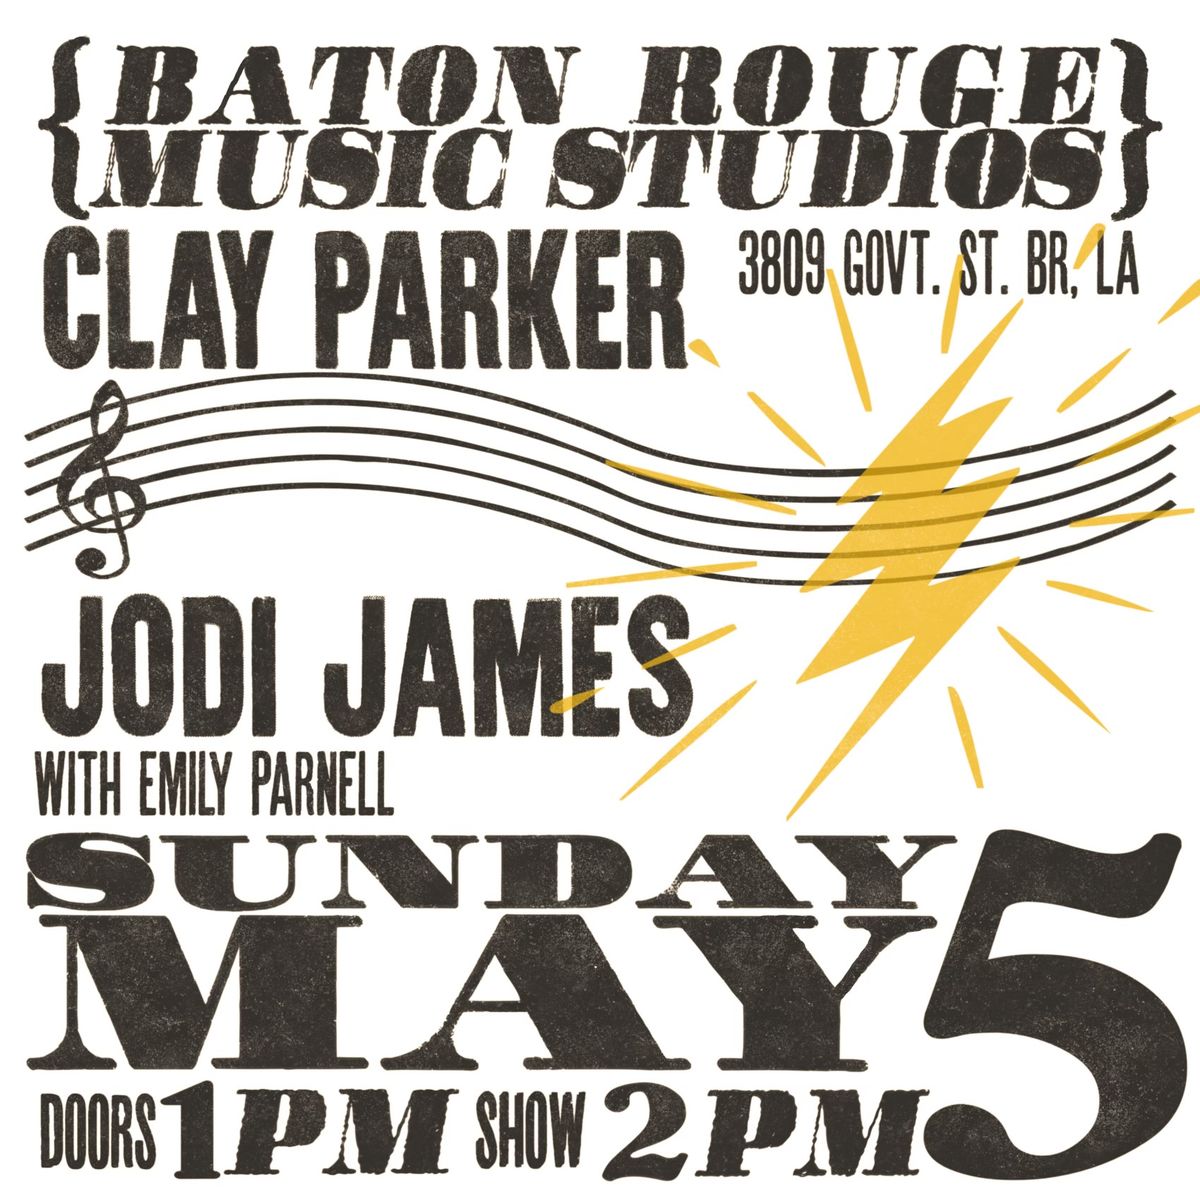 Cinco de Mayo at The Studios with Clay Parker and Jodi James!